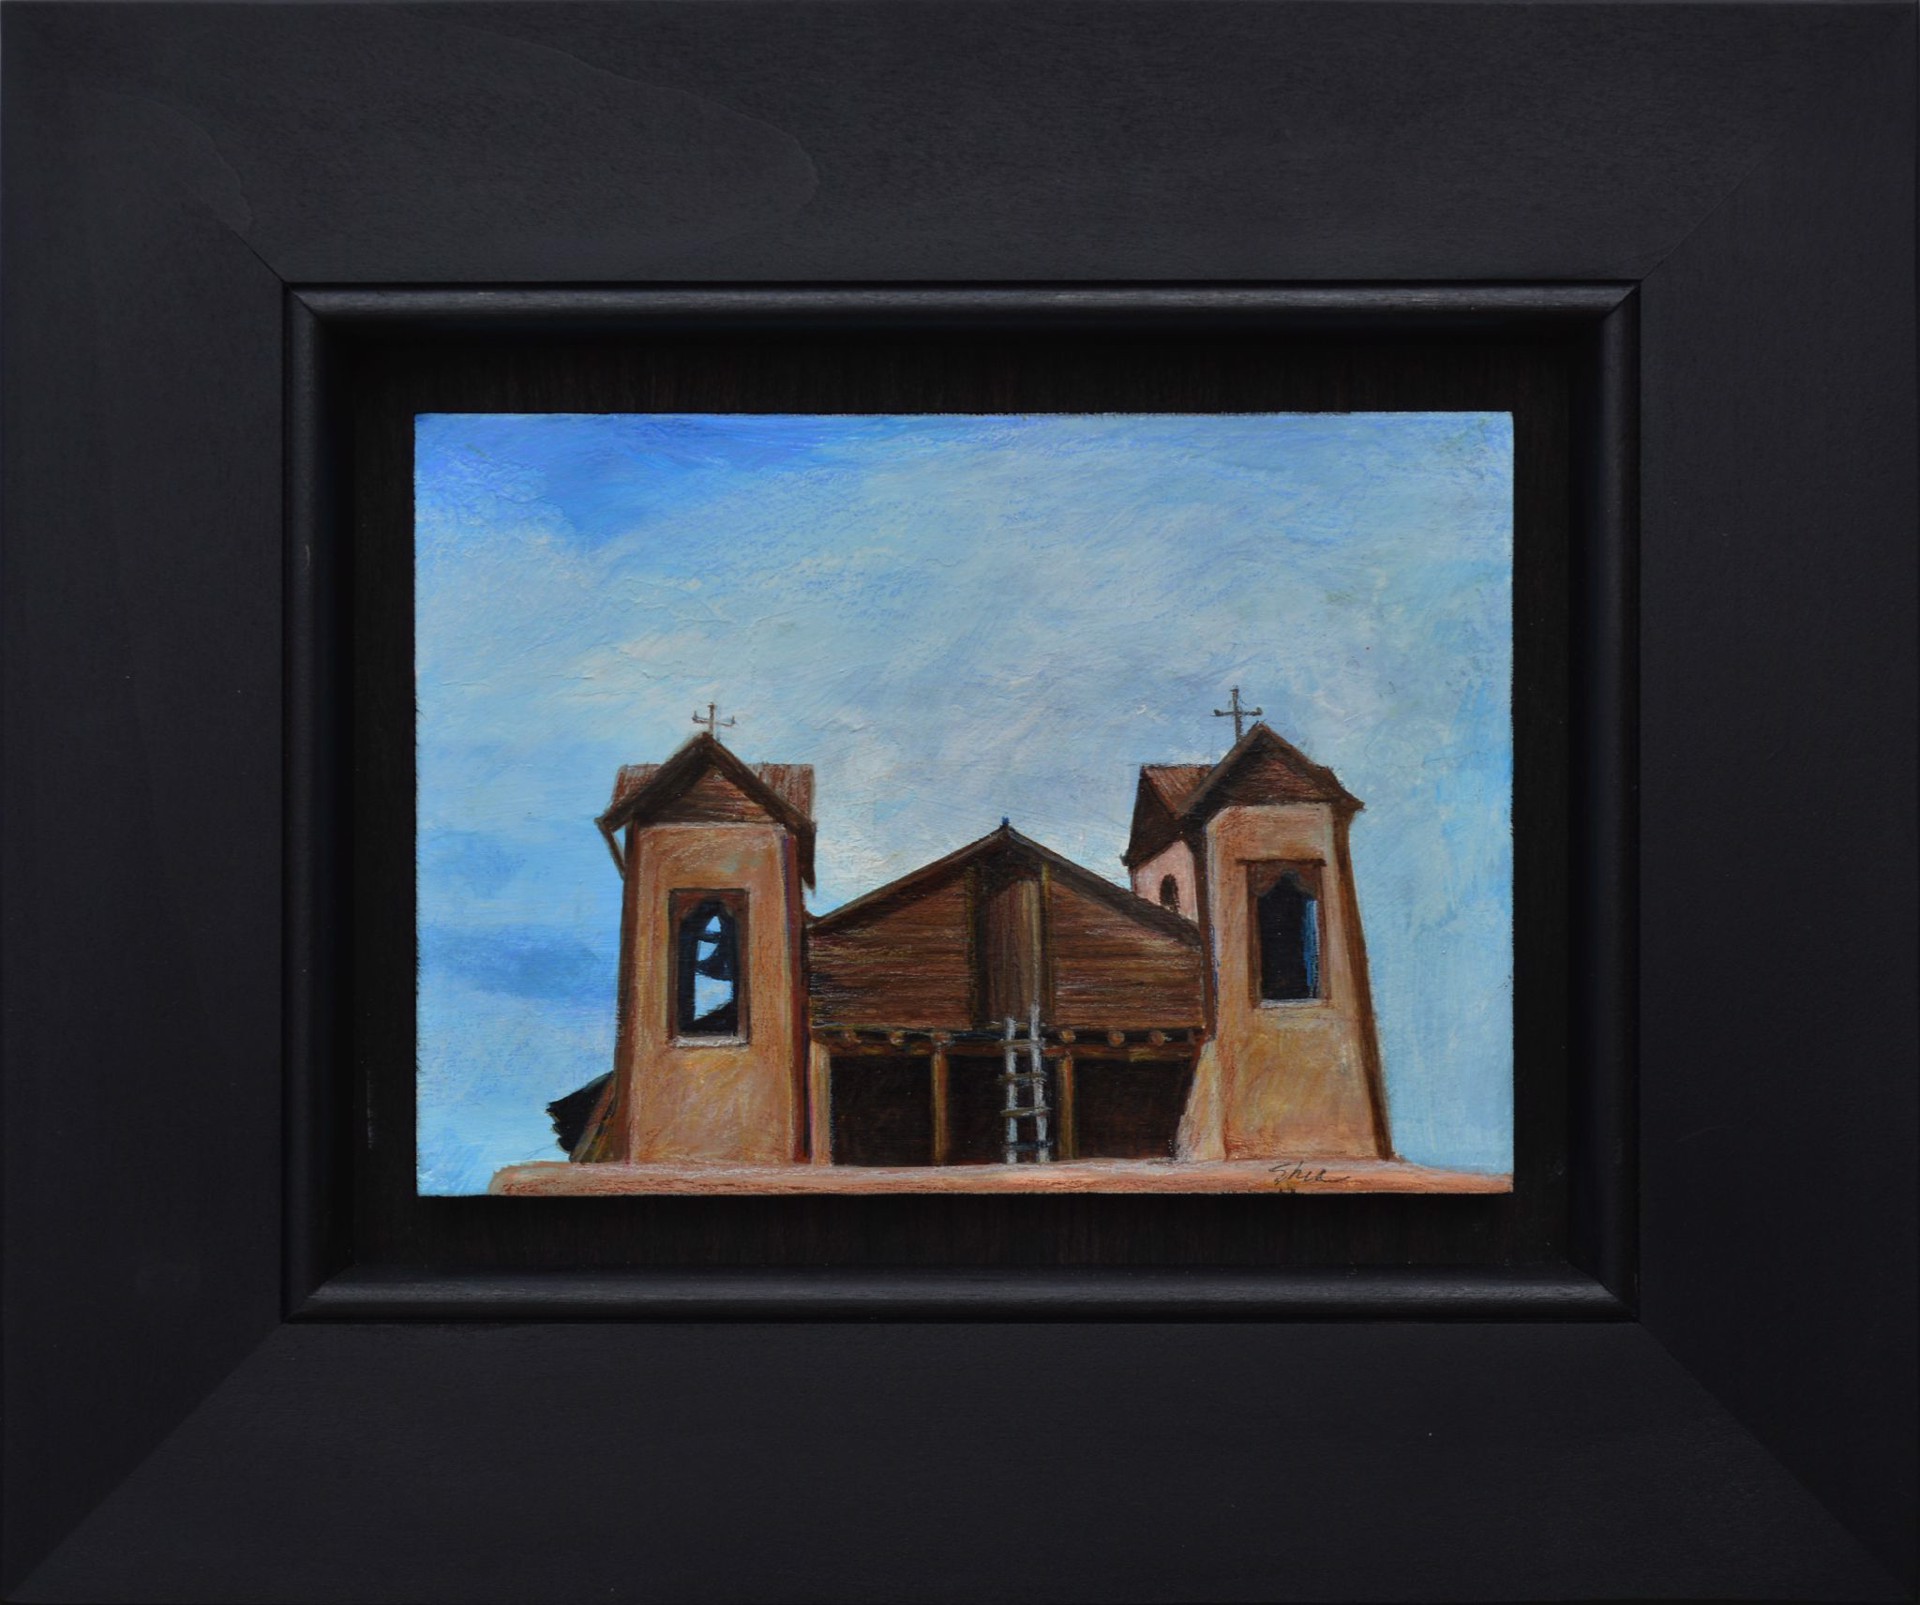 Chimayo Bell Towers by Jane Shea